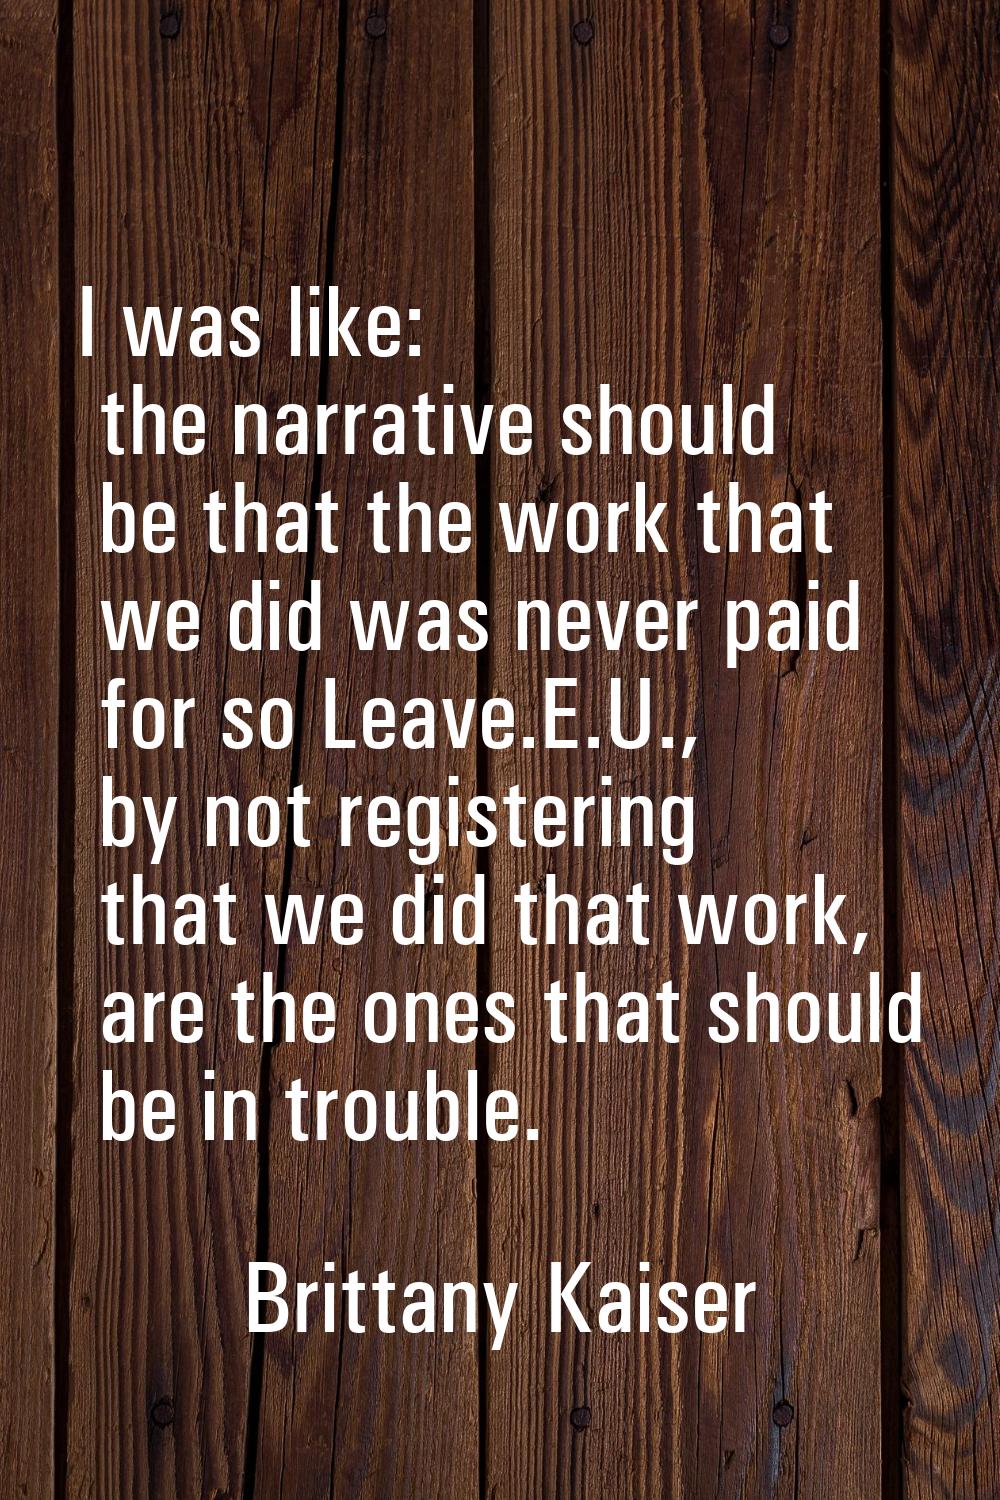 I was like: the narrative should be that the work that we did was never paid for so Leave.E.U., by 